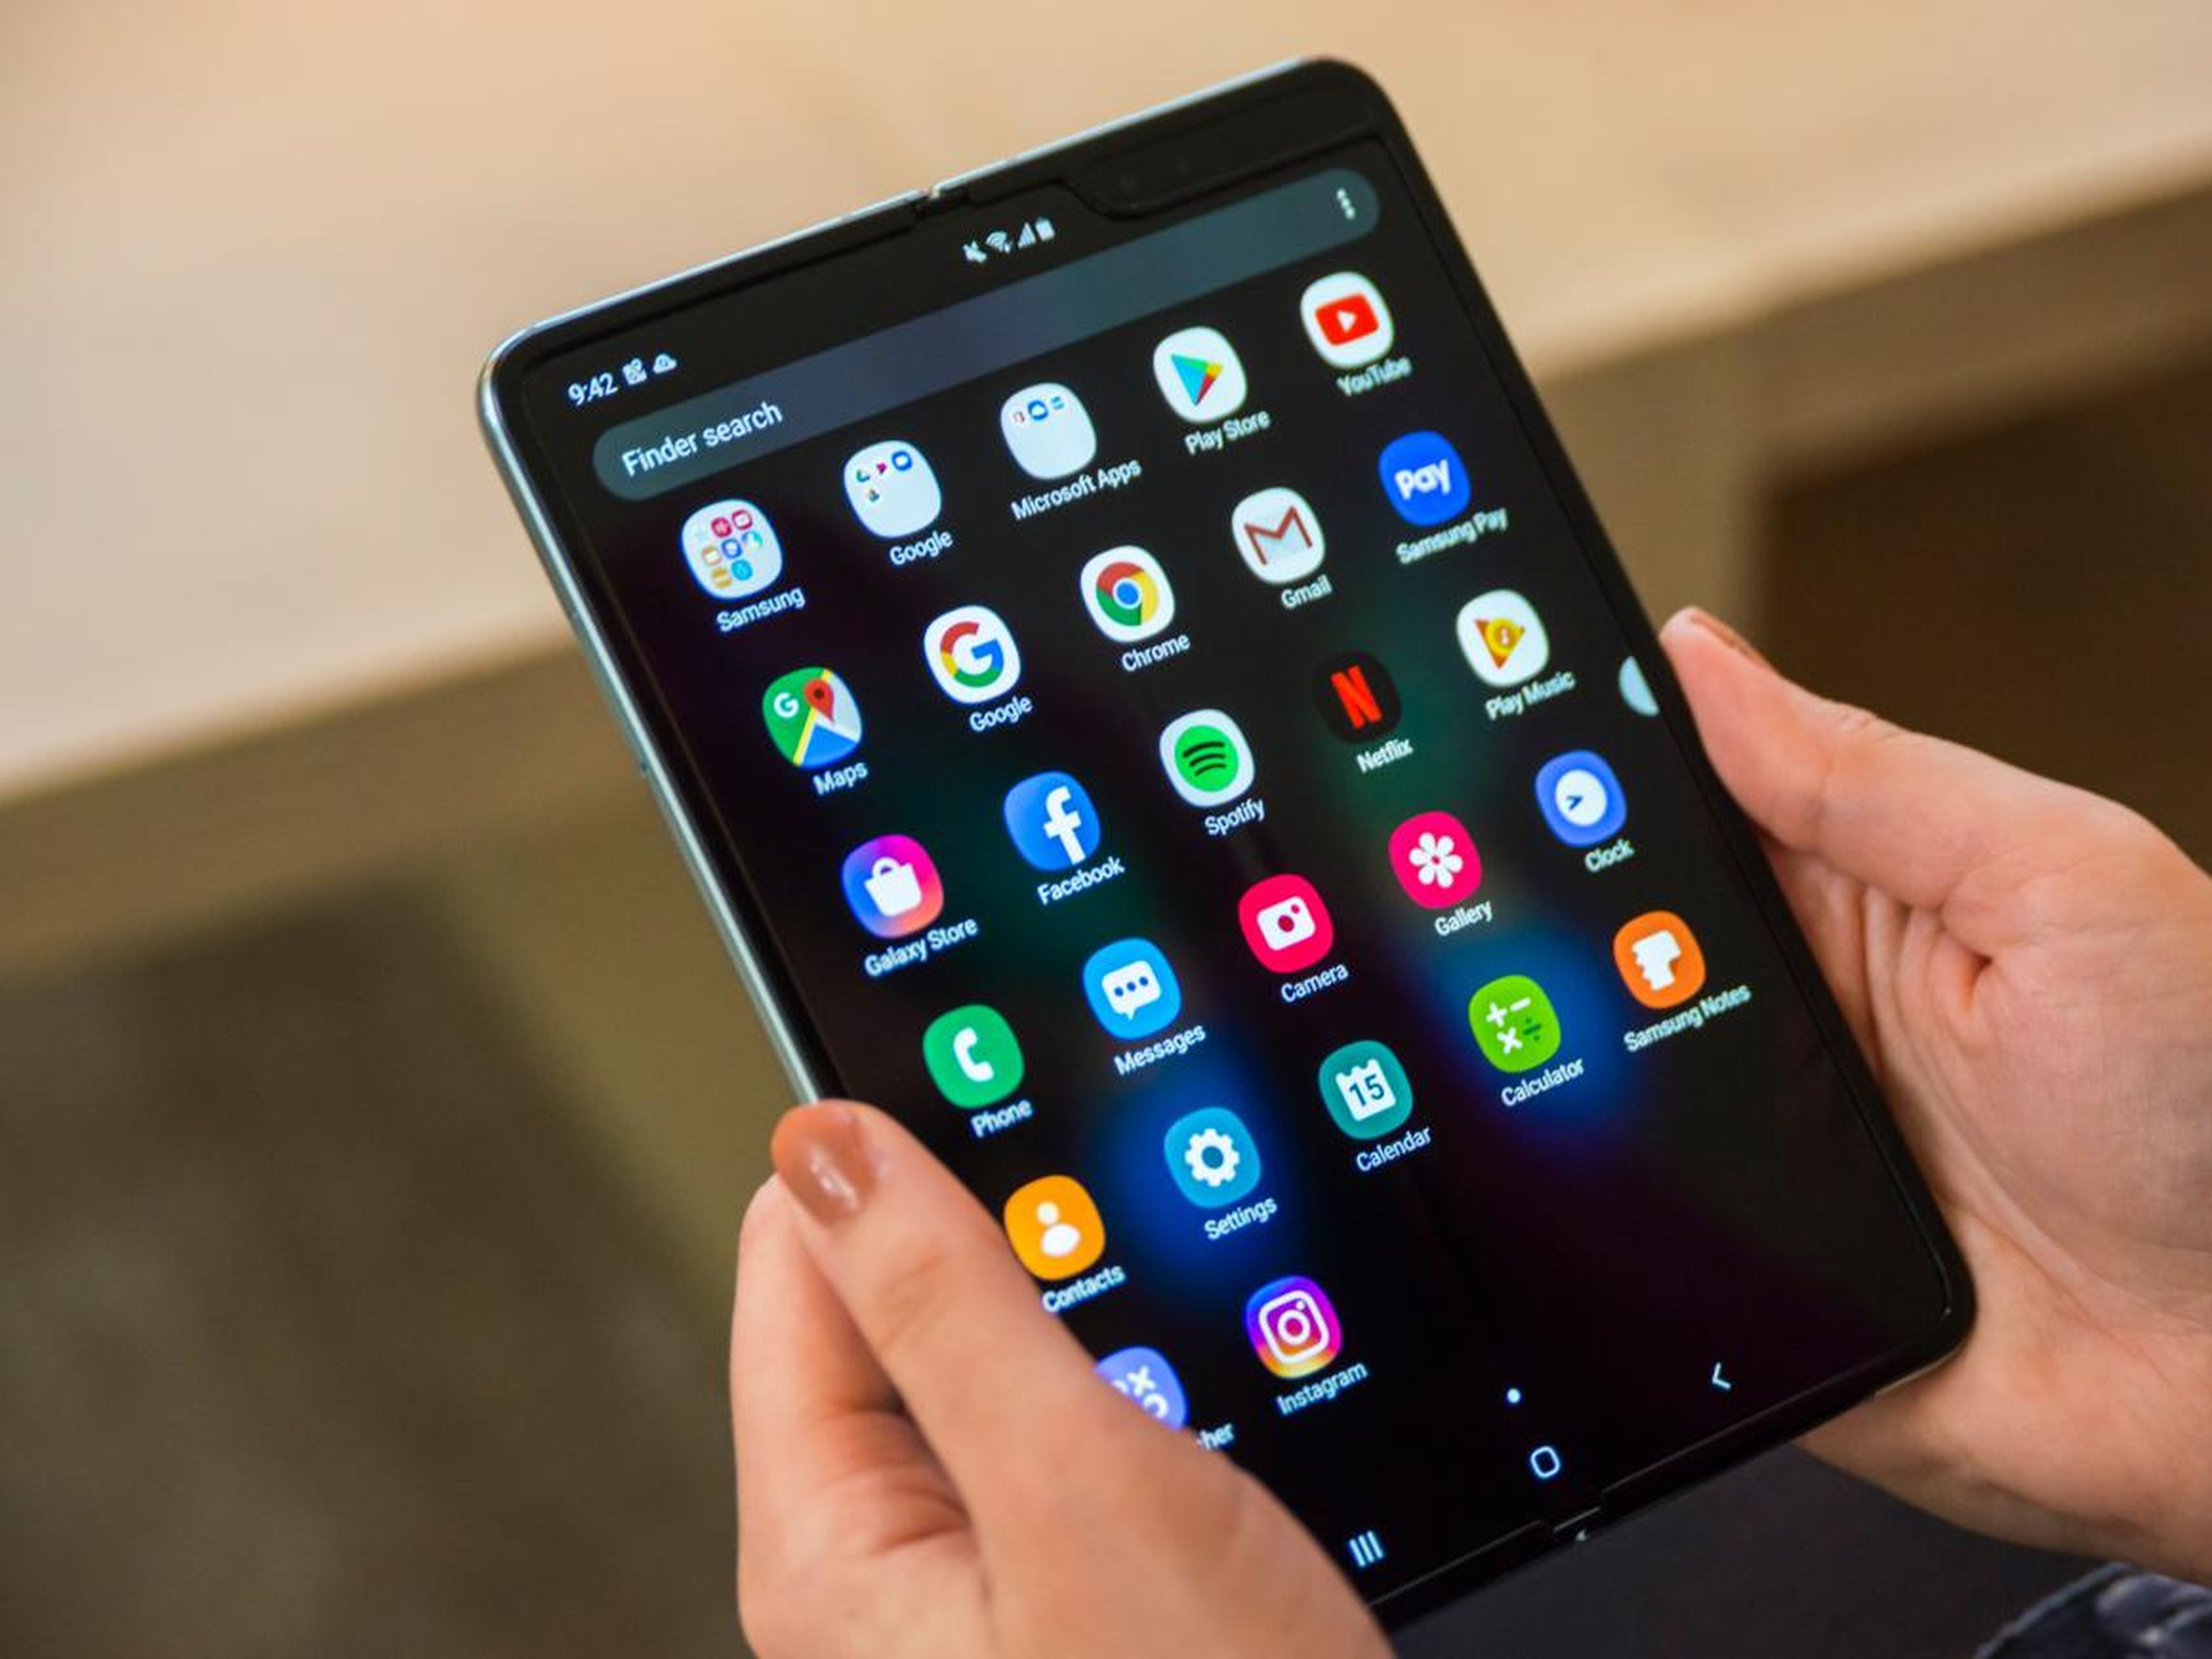 Samsung's Galaxy Fold contains a 7.3-inch tablet-sized display inside.